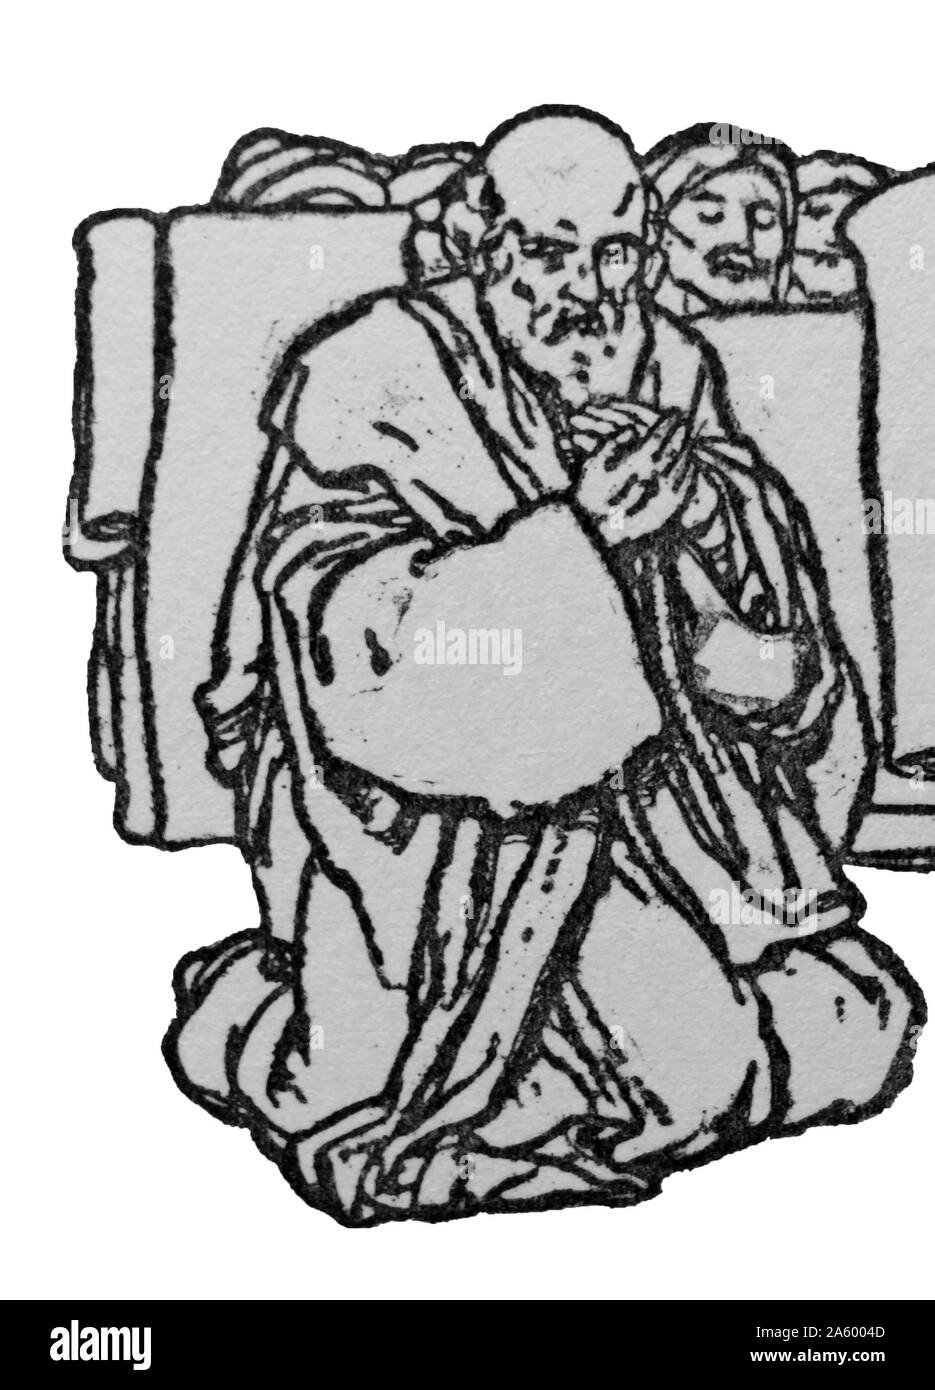 Engraving depicting a disciple of Jesus Stock Photo